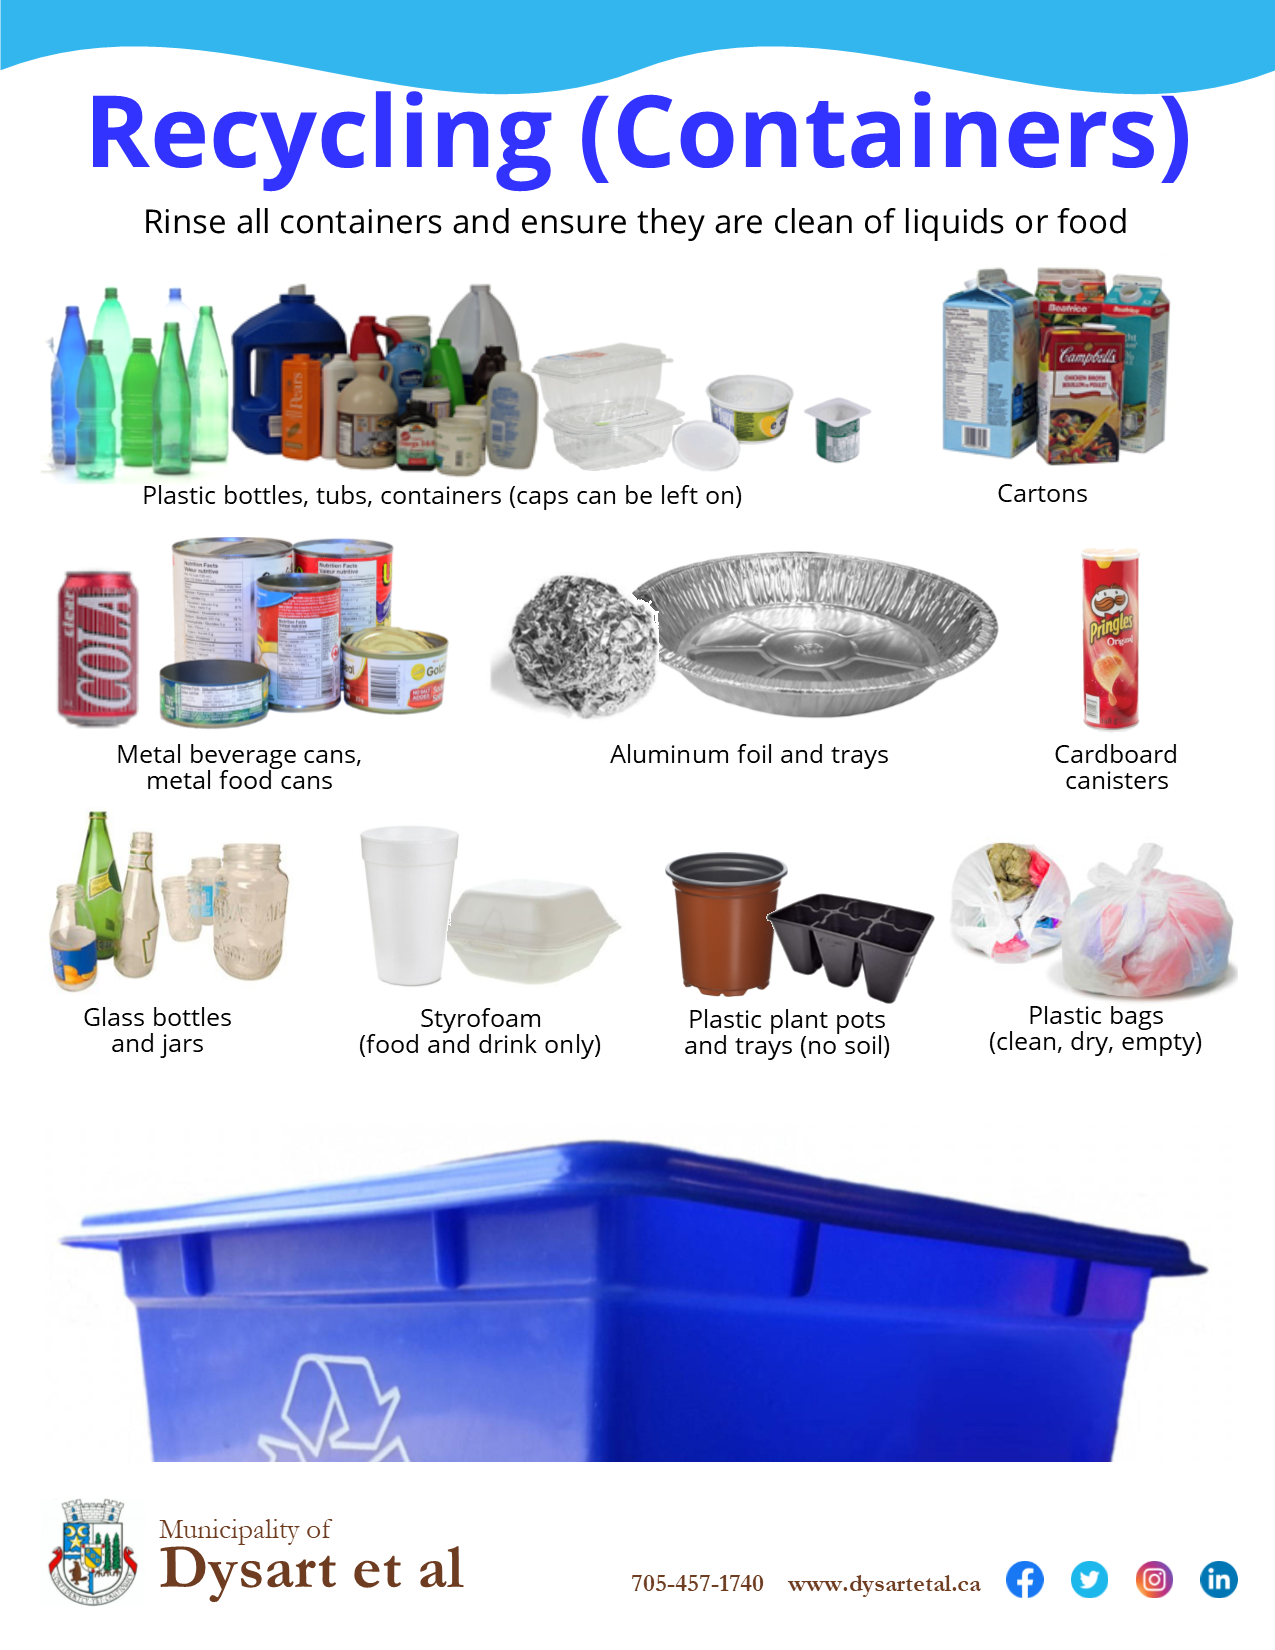 Recycling for Containers